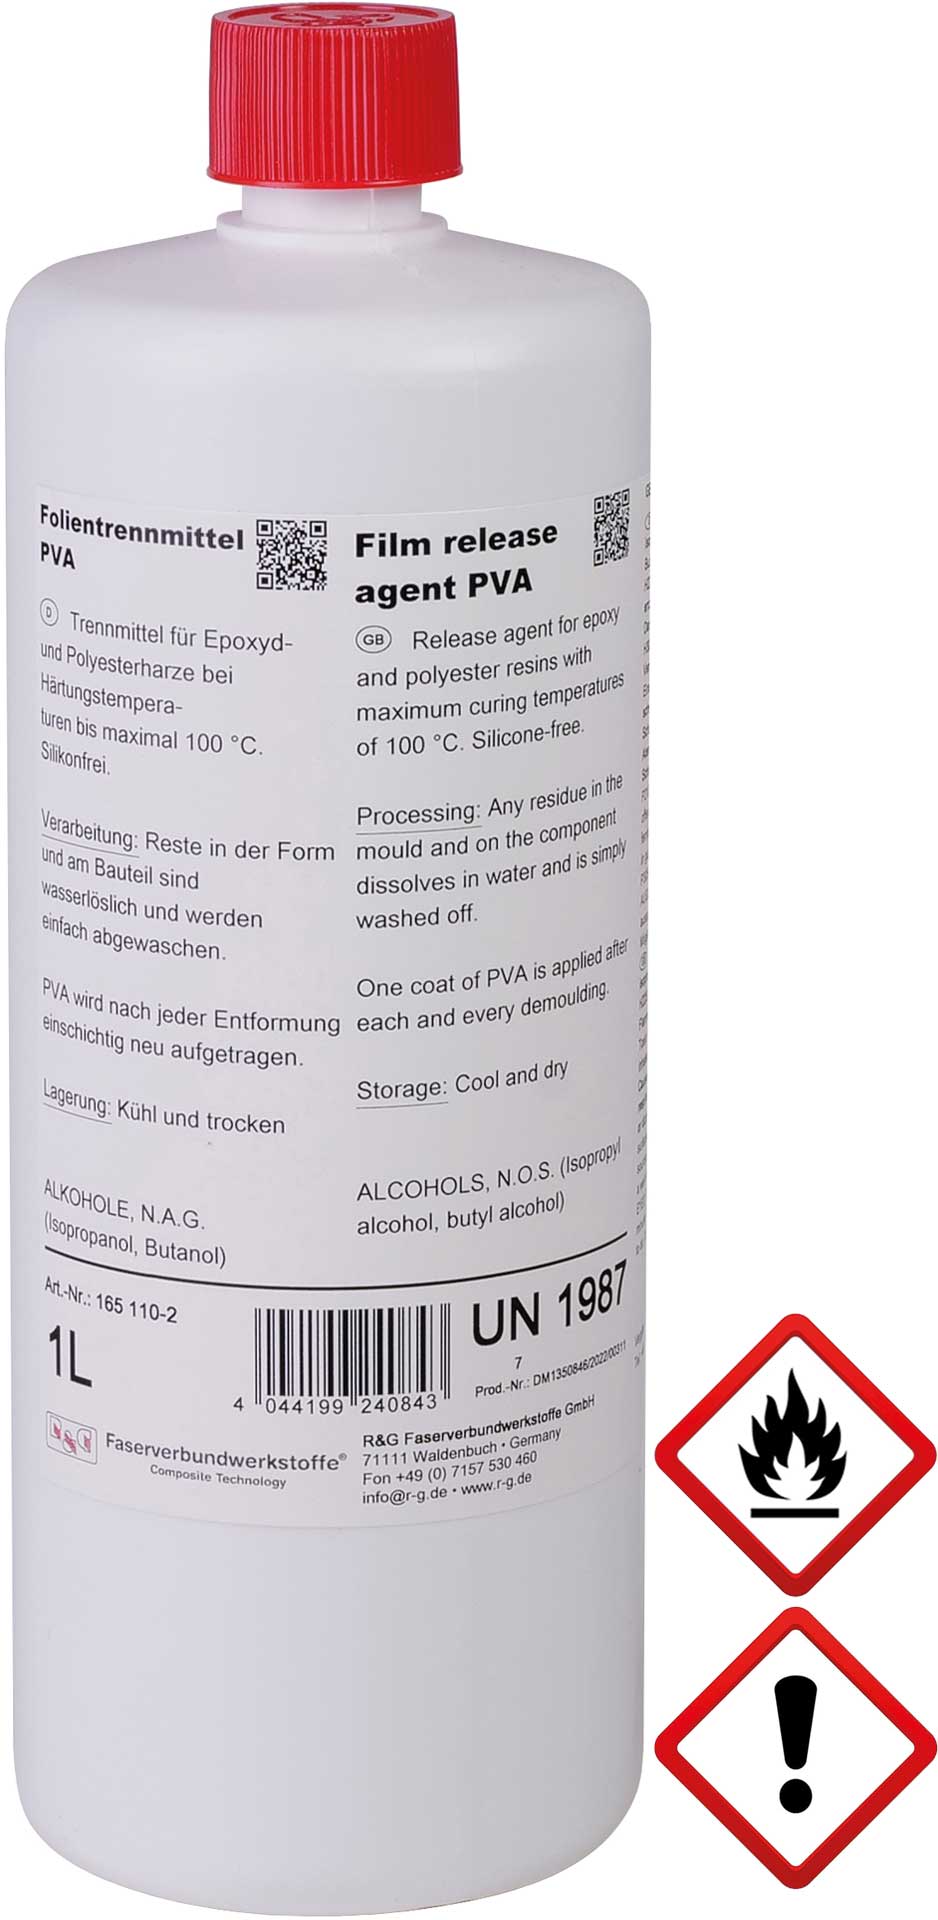 R&G FILM RELEASE AGENT PVA 5LITER/ Canister